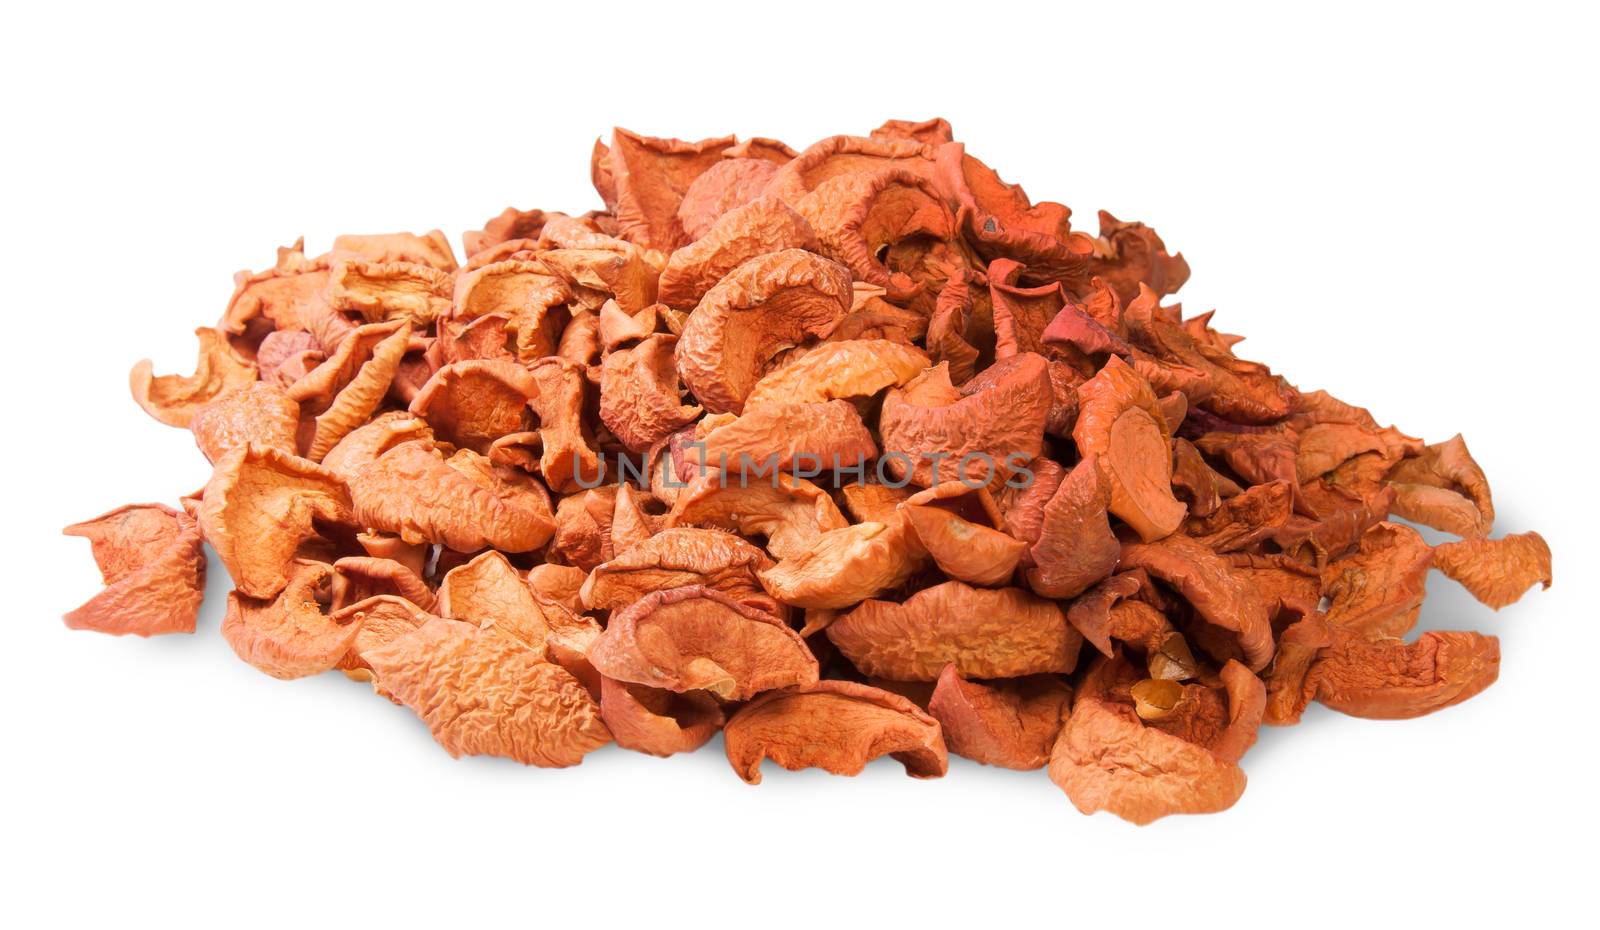 Dried Apple Slices Isolated On White Background